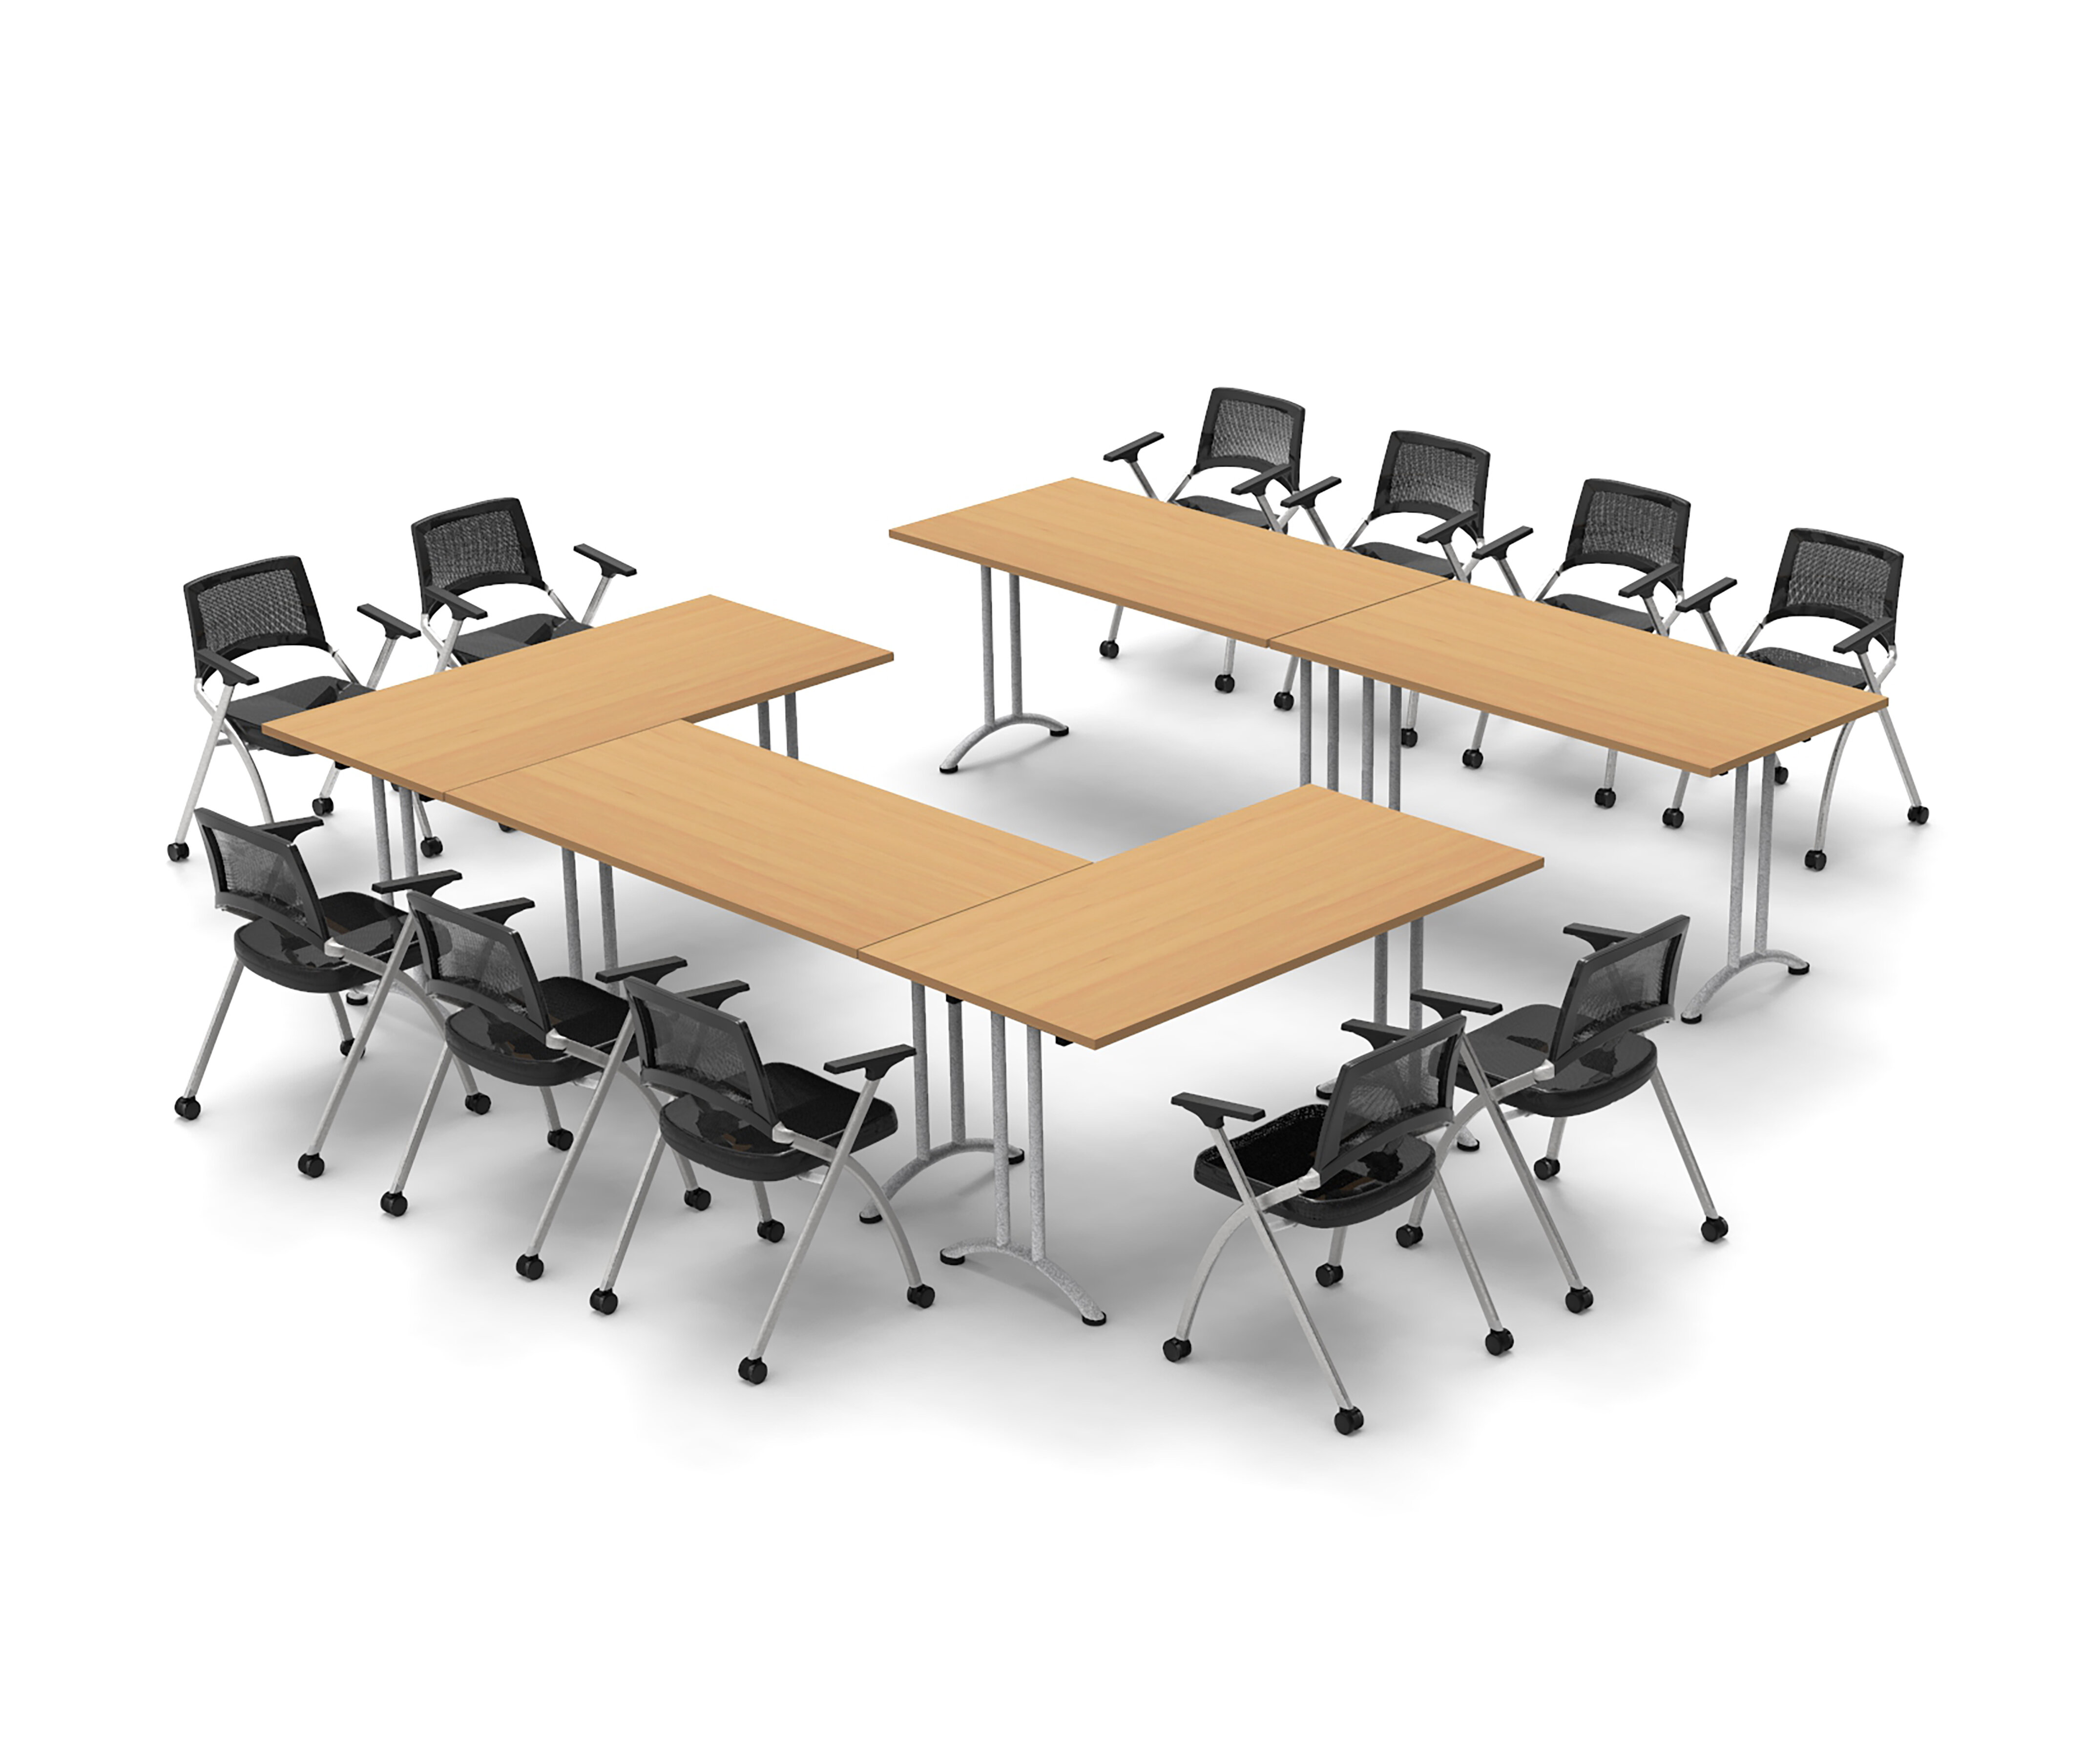 Easy-to-Setup-and-Use Chairs Not Included Natural Beech Assembled TeamWORKTables 2908 Compact Space Maximum Collaboration Meeting Seminar Conference Tables 3 Piece Combo